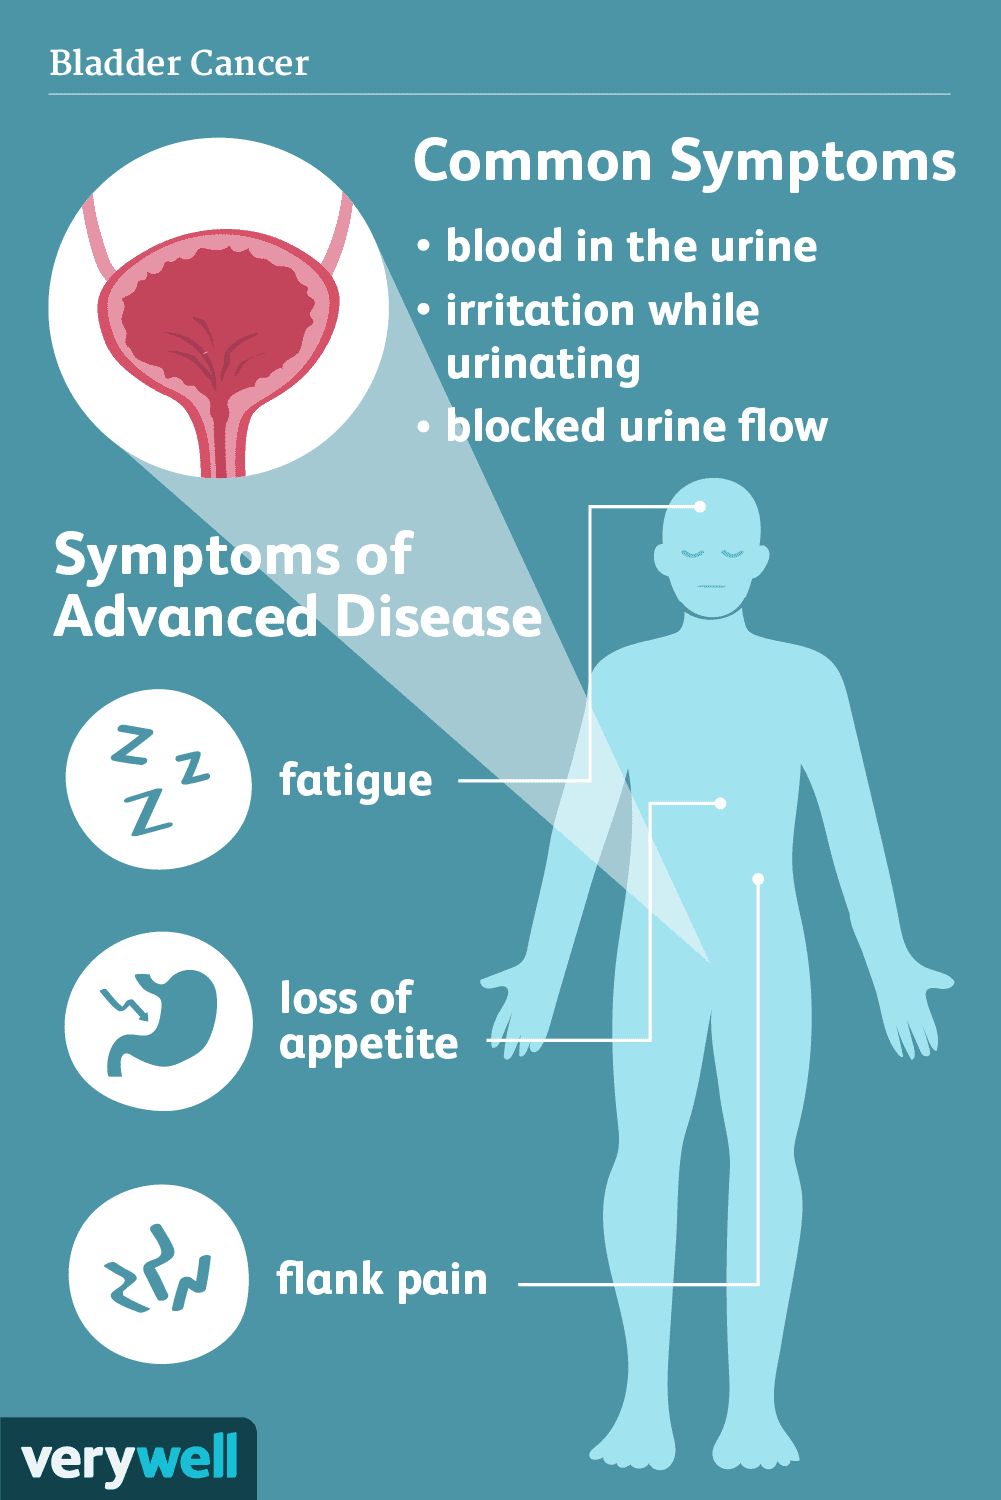 Advanced bladder cancer symptoms include blood in urine, pelvic pain, frequent urination, and back pain. These signs indicate a need for prompt medical evaluation to determine appropriate treatment.